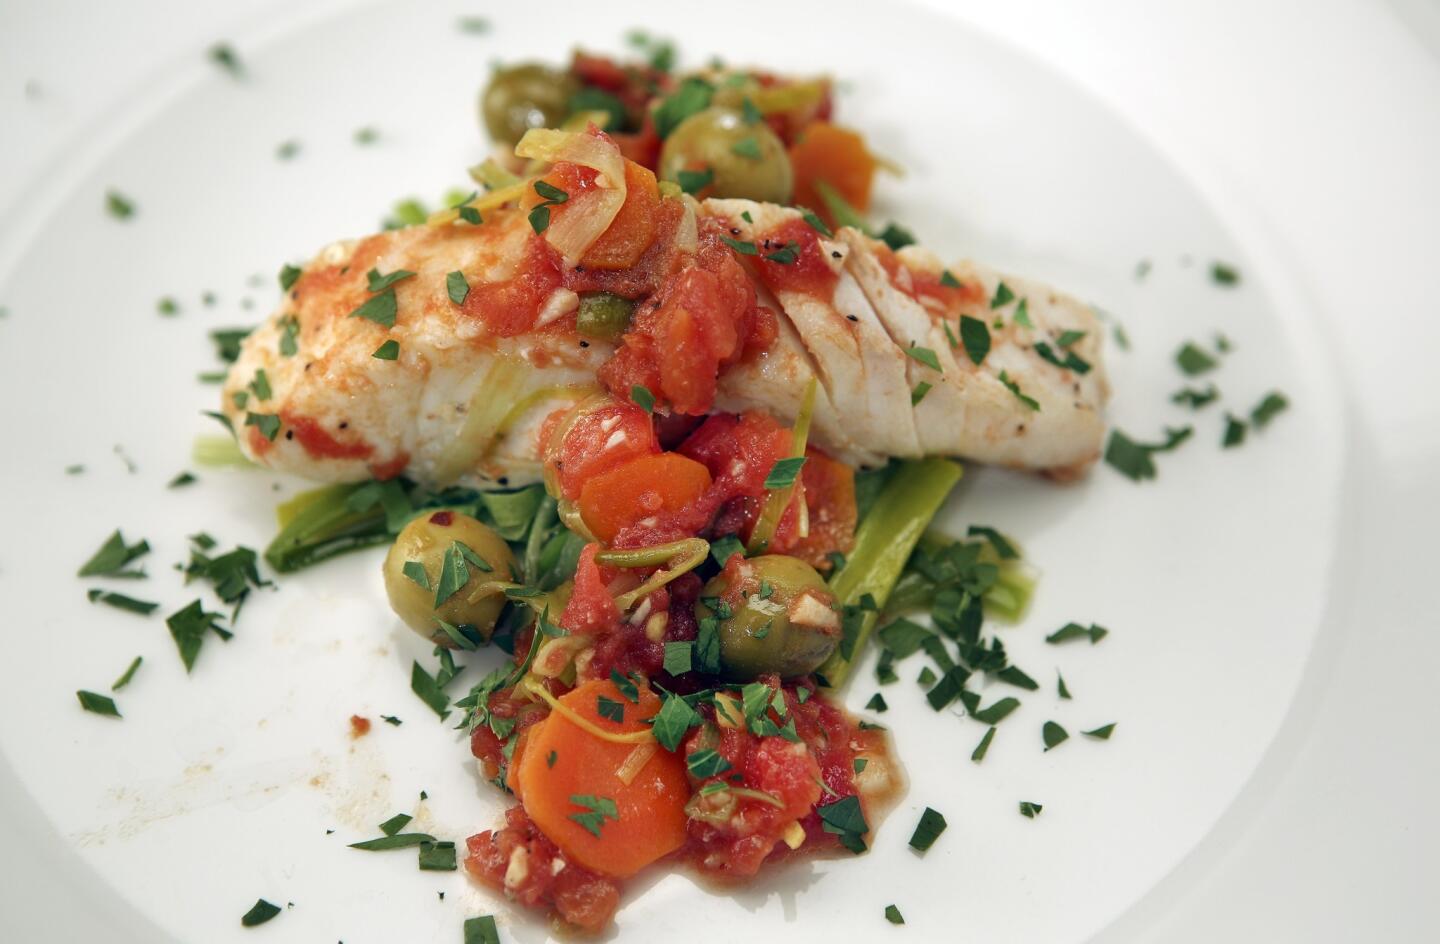 Halibut with leeks, tomatoes and olives